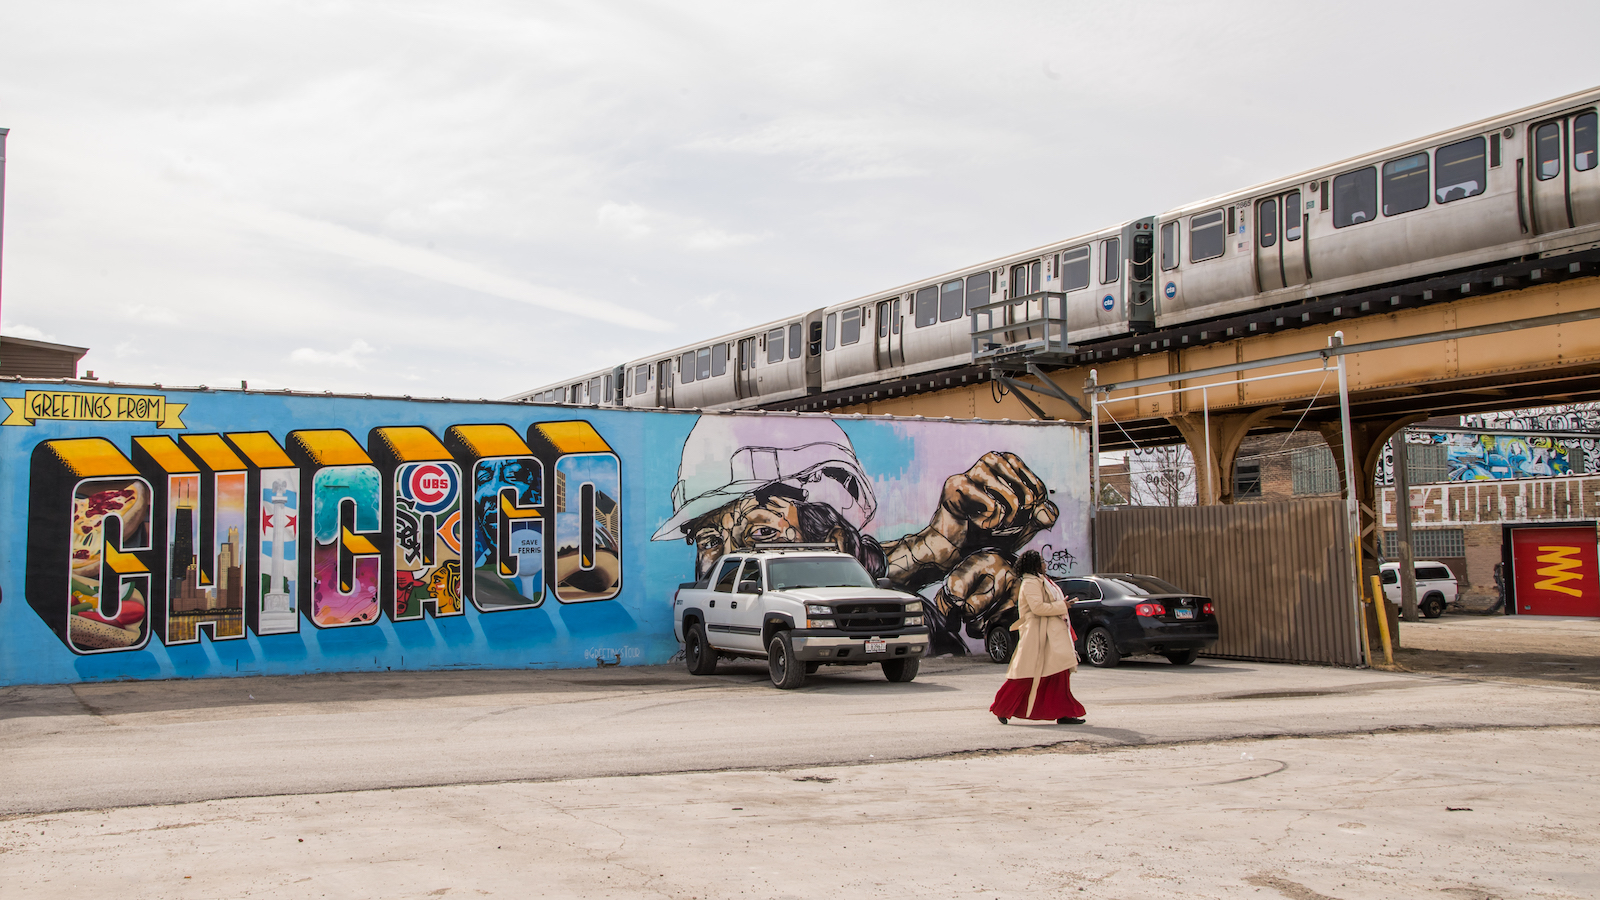 A mural with the world Chicago on it next to an elevated train track and woman walking across a parking lot.